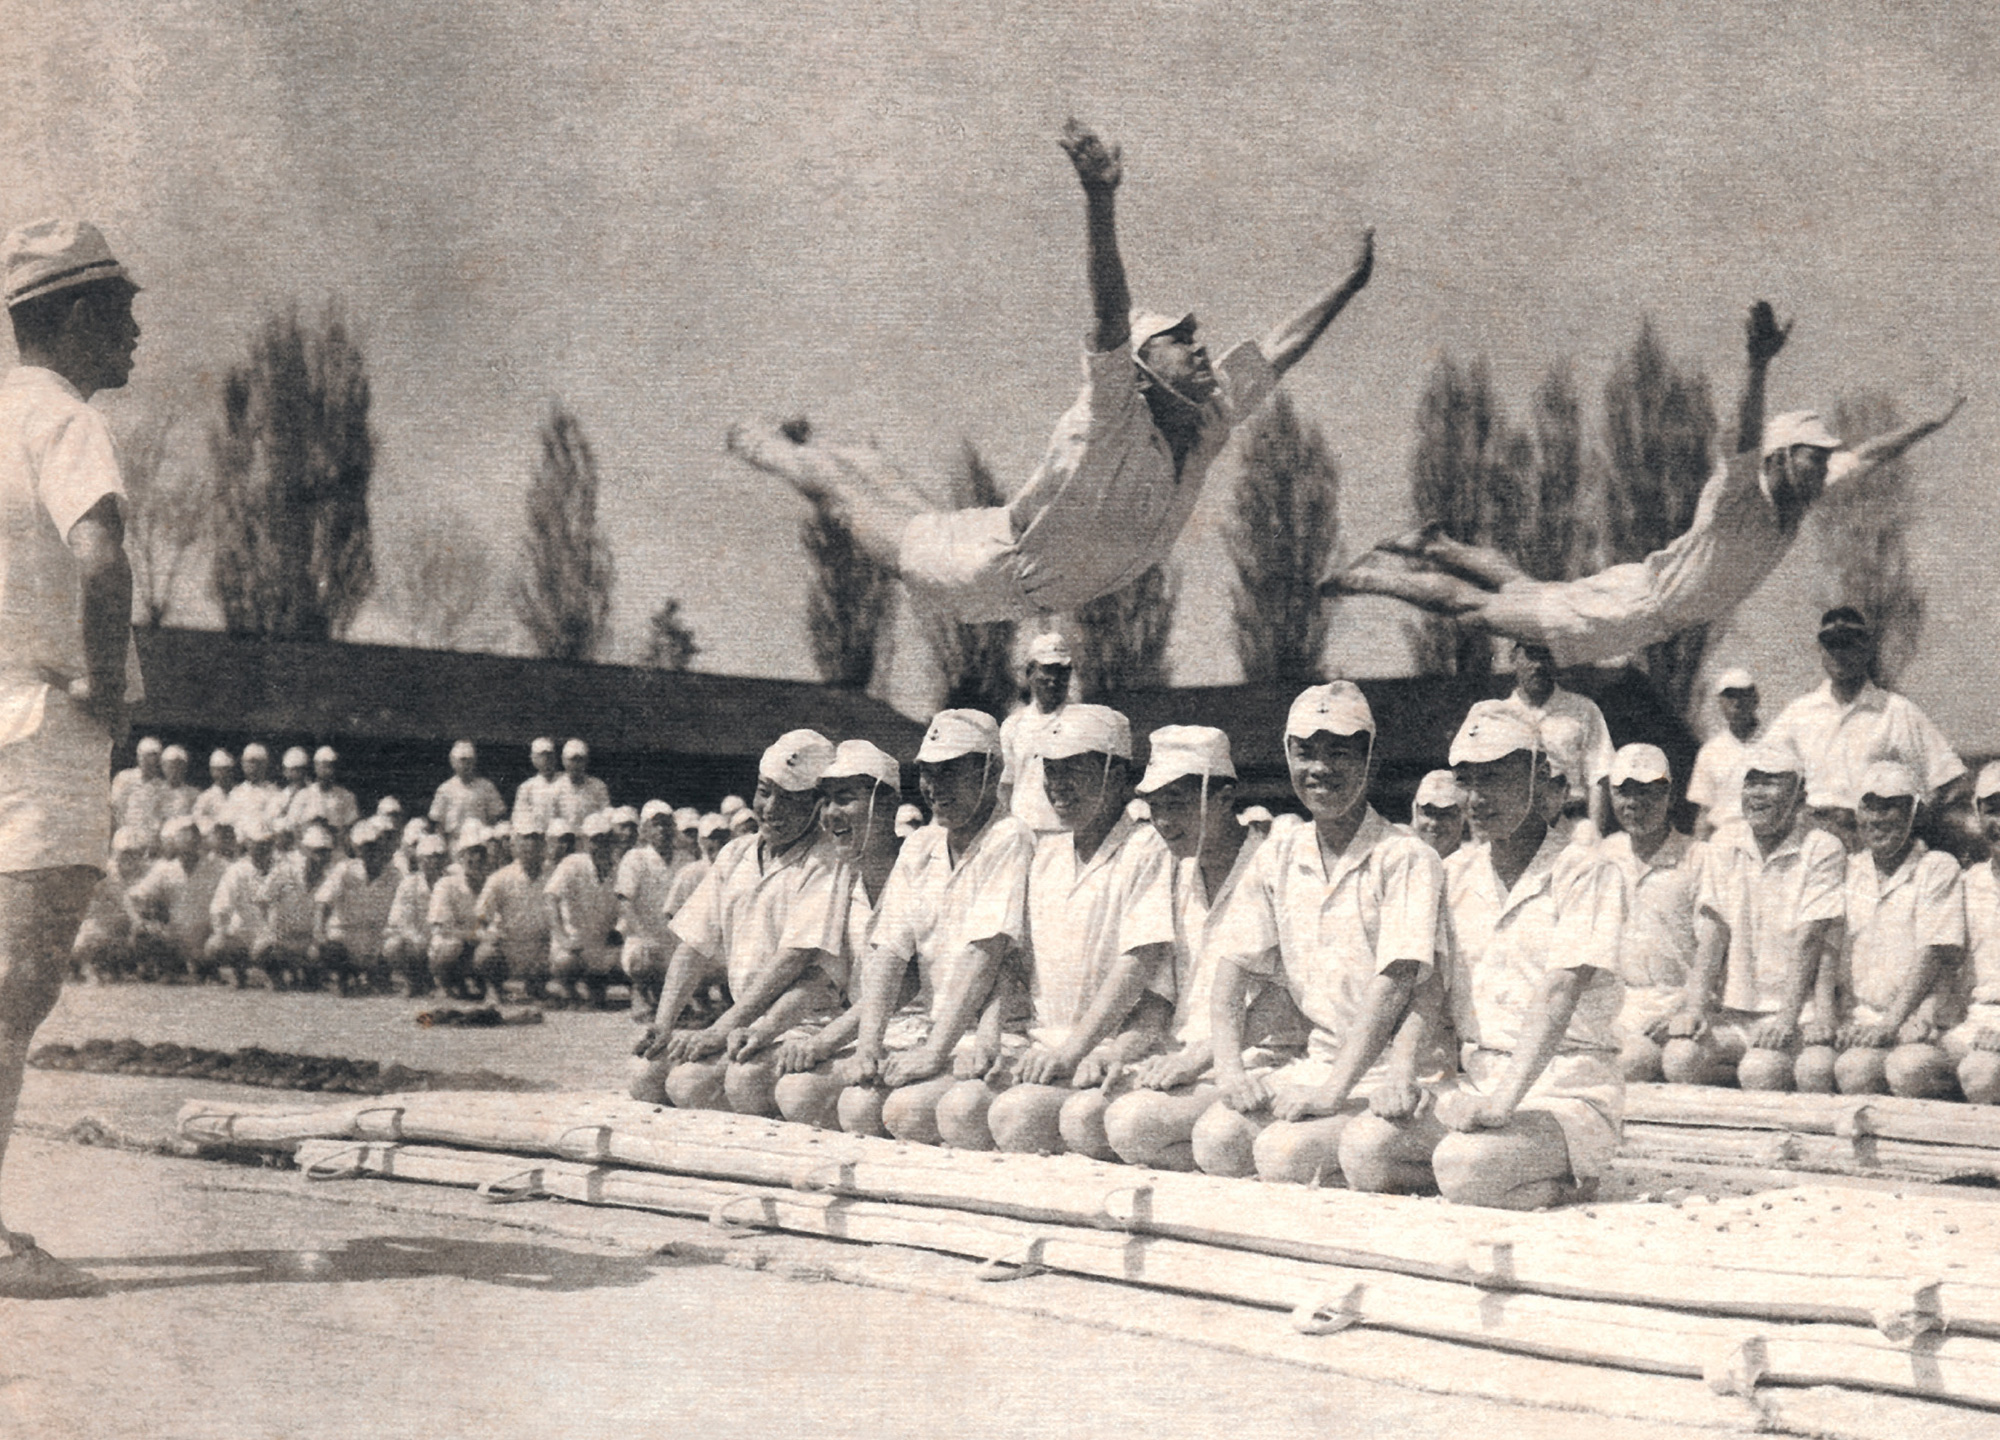 A photograph showing men in uniform leaping through the air with their arms outstretched, a basic mat exercise for the students in the Primary Aviation Course.